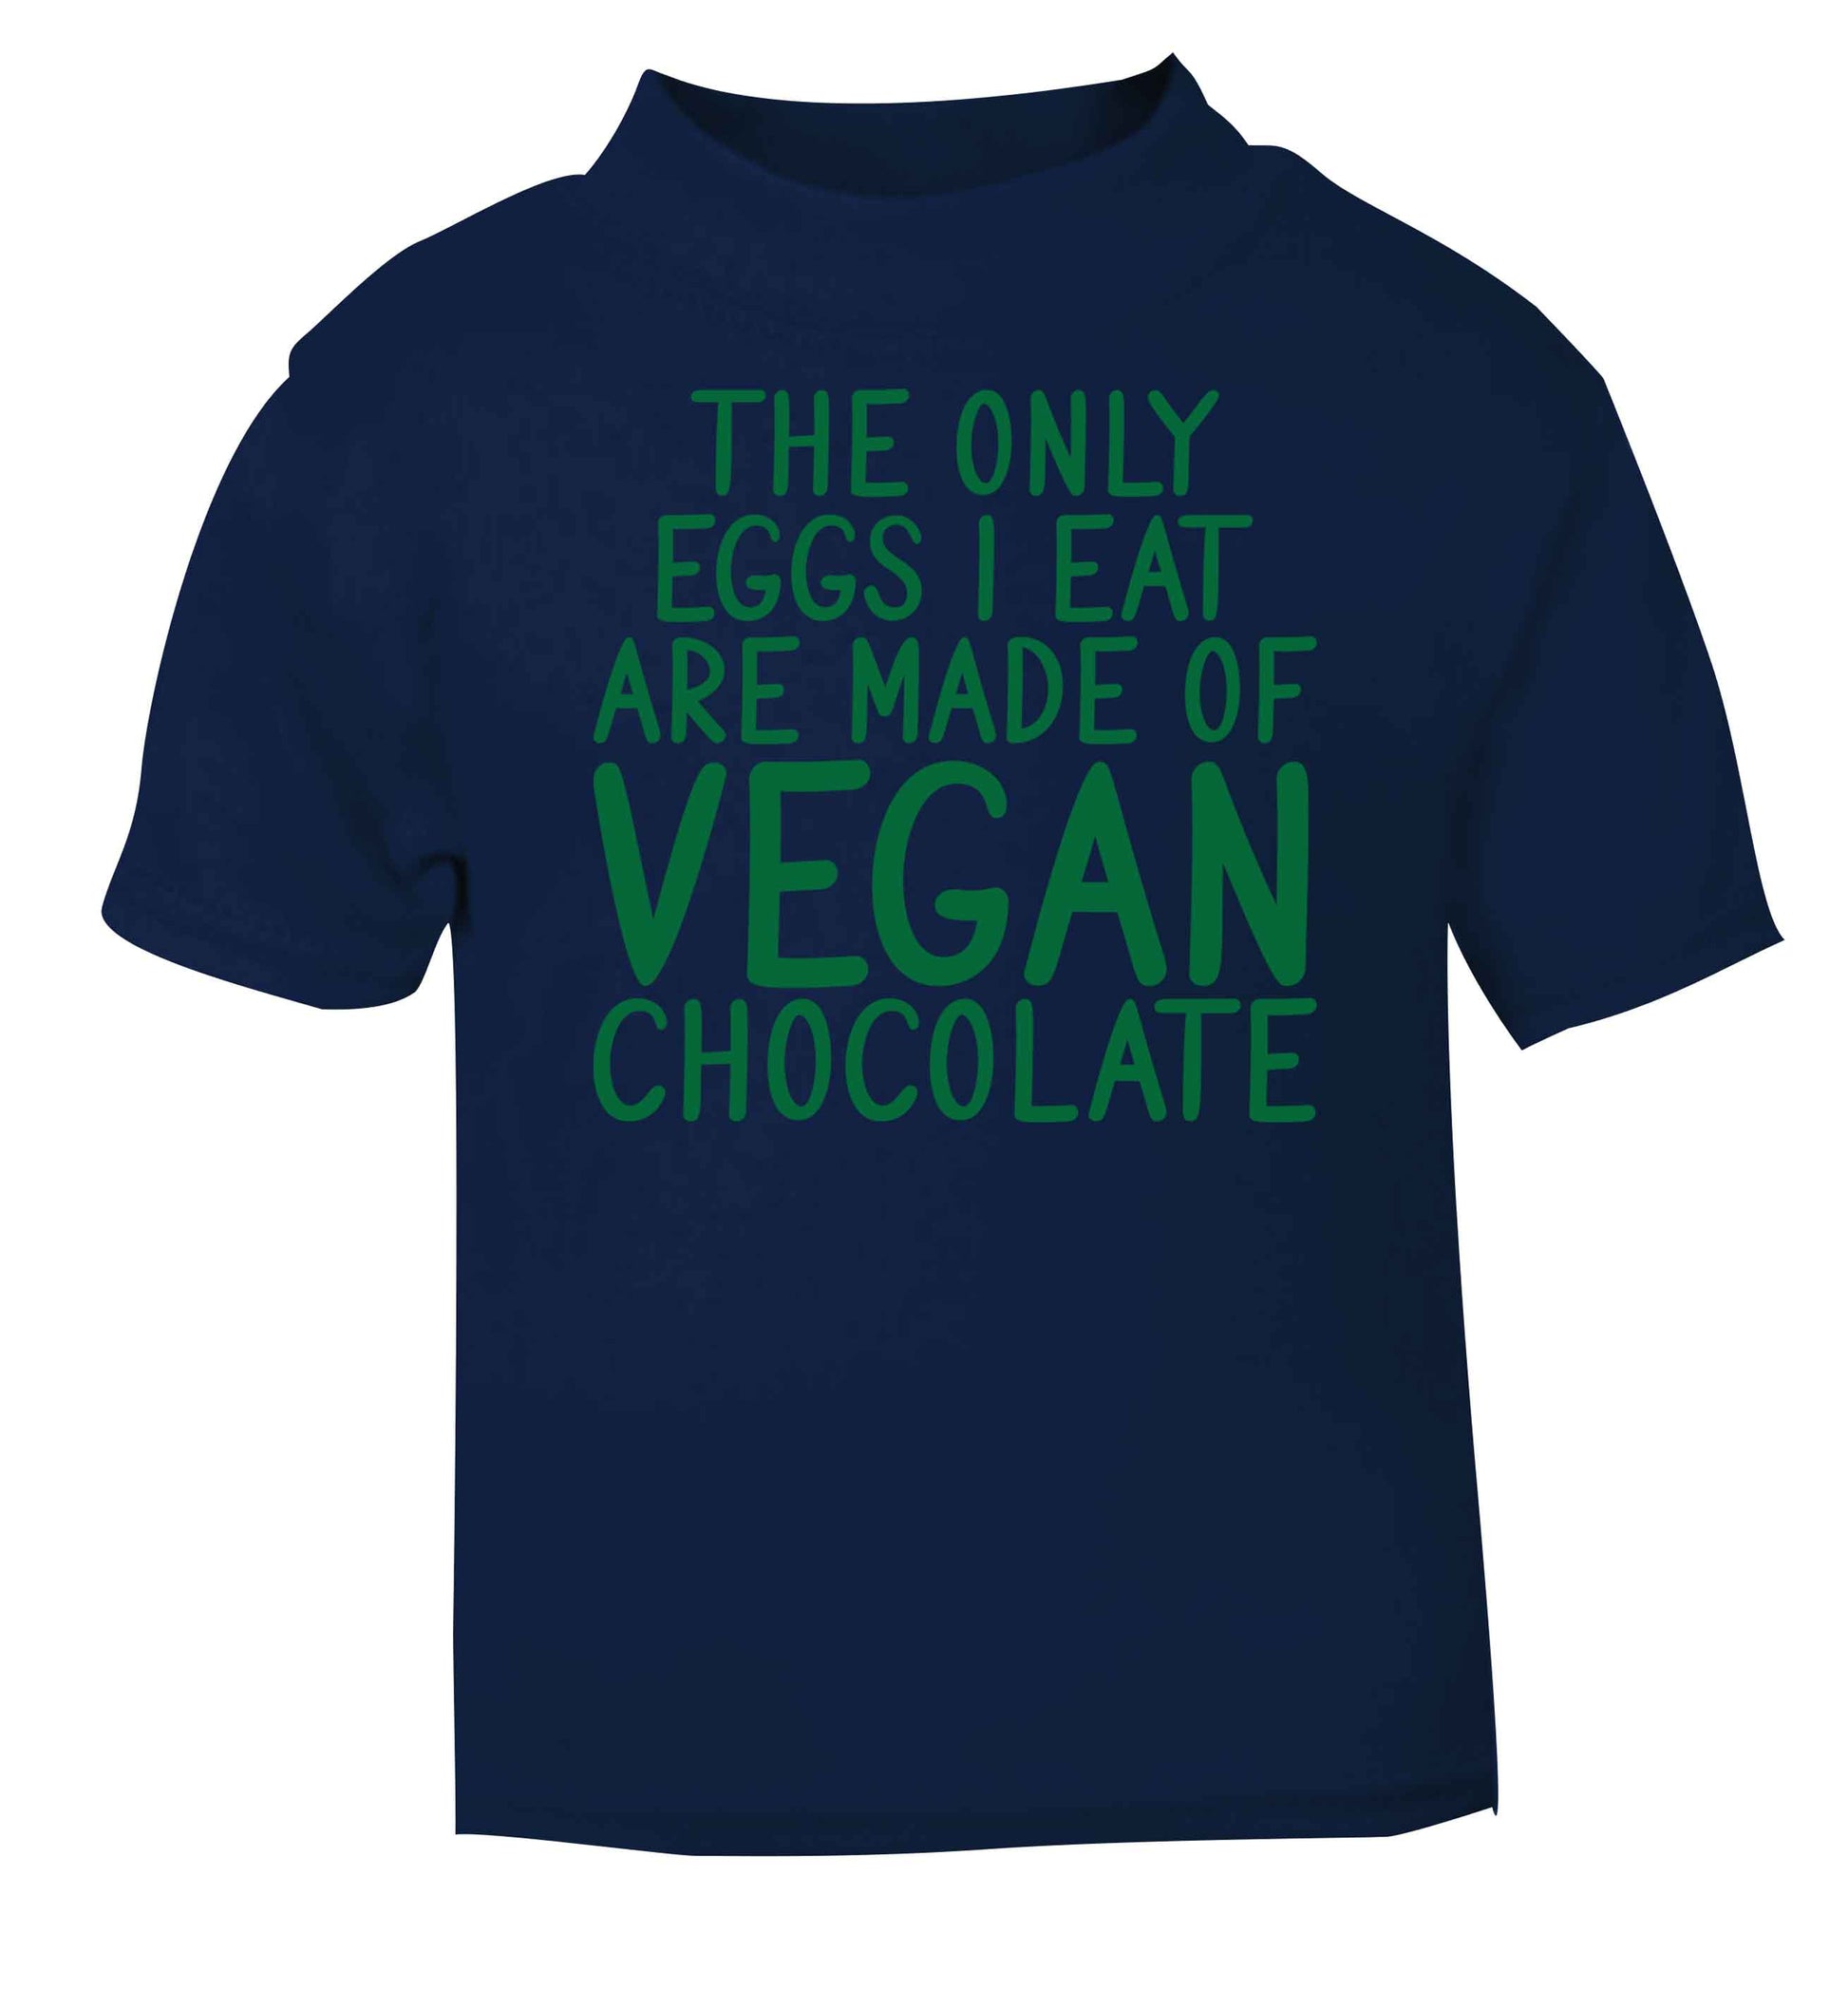 The only eggs I eat are made of vegan chocolate navy baby toddler Tshirt 2 Years